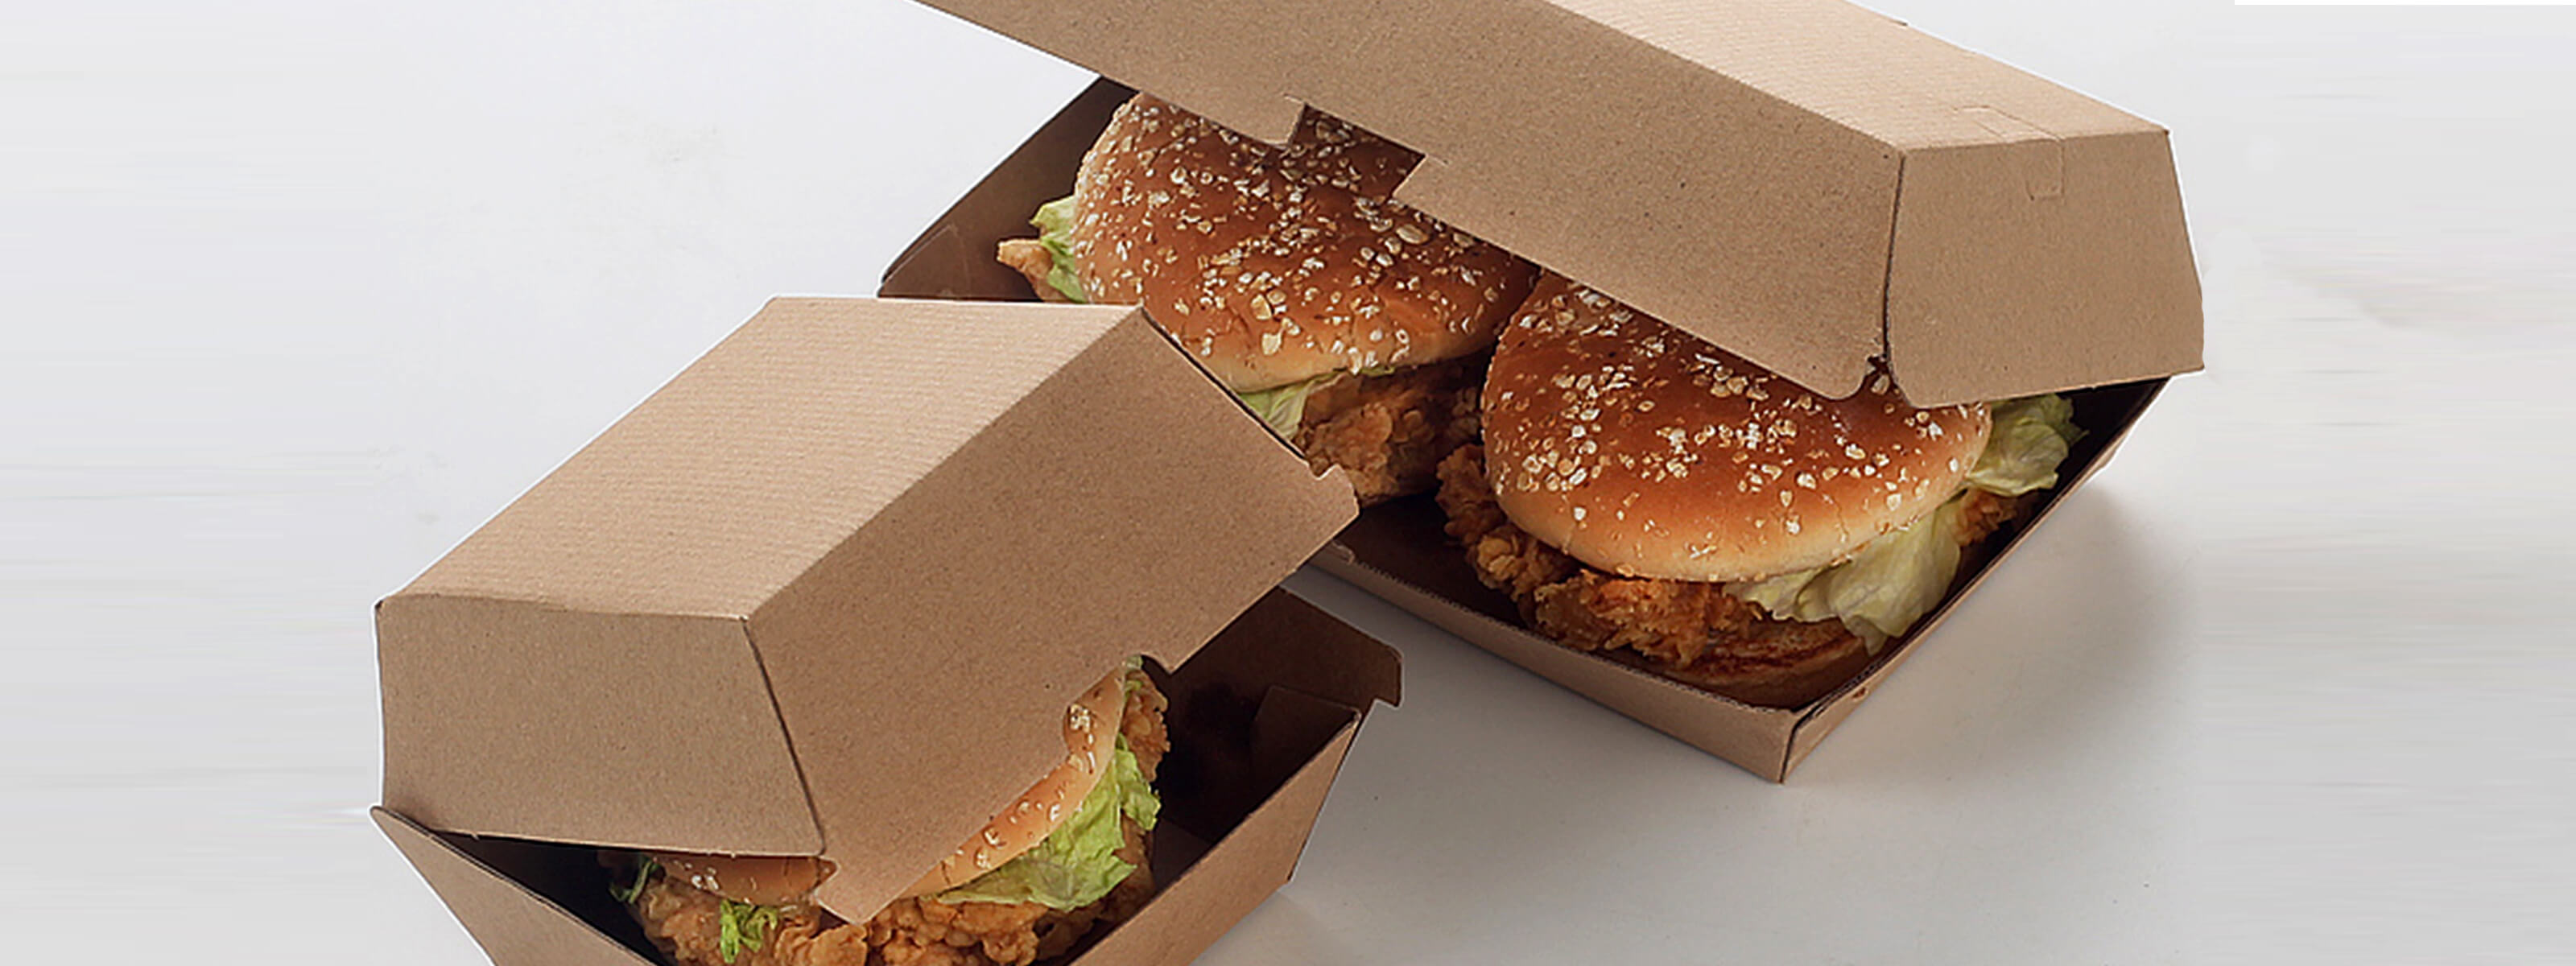 Wholesale Burger Boxes and its Importance